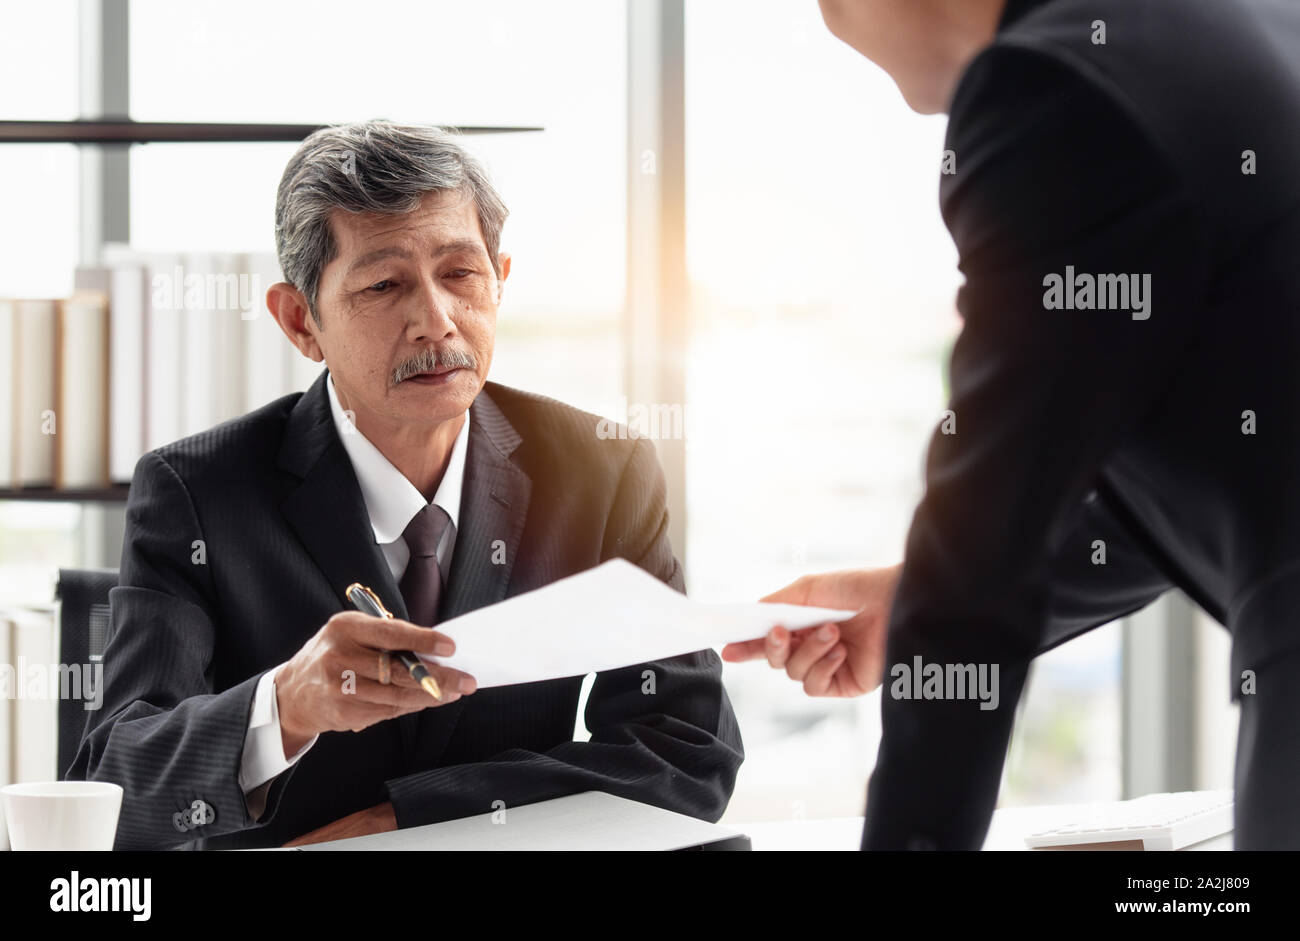 The young businessman sending the report to his boss on hand in the office room. Stock Photo